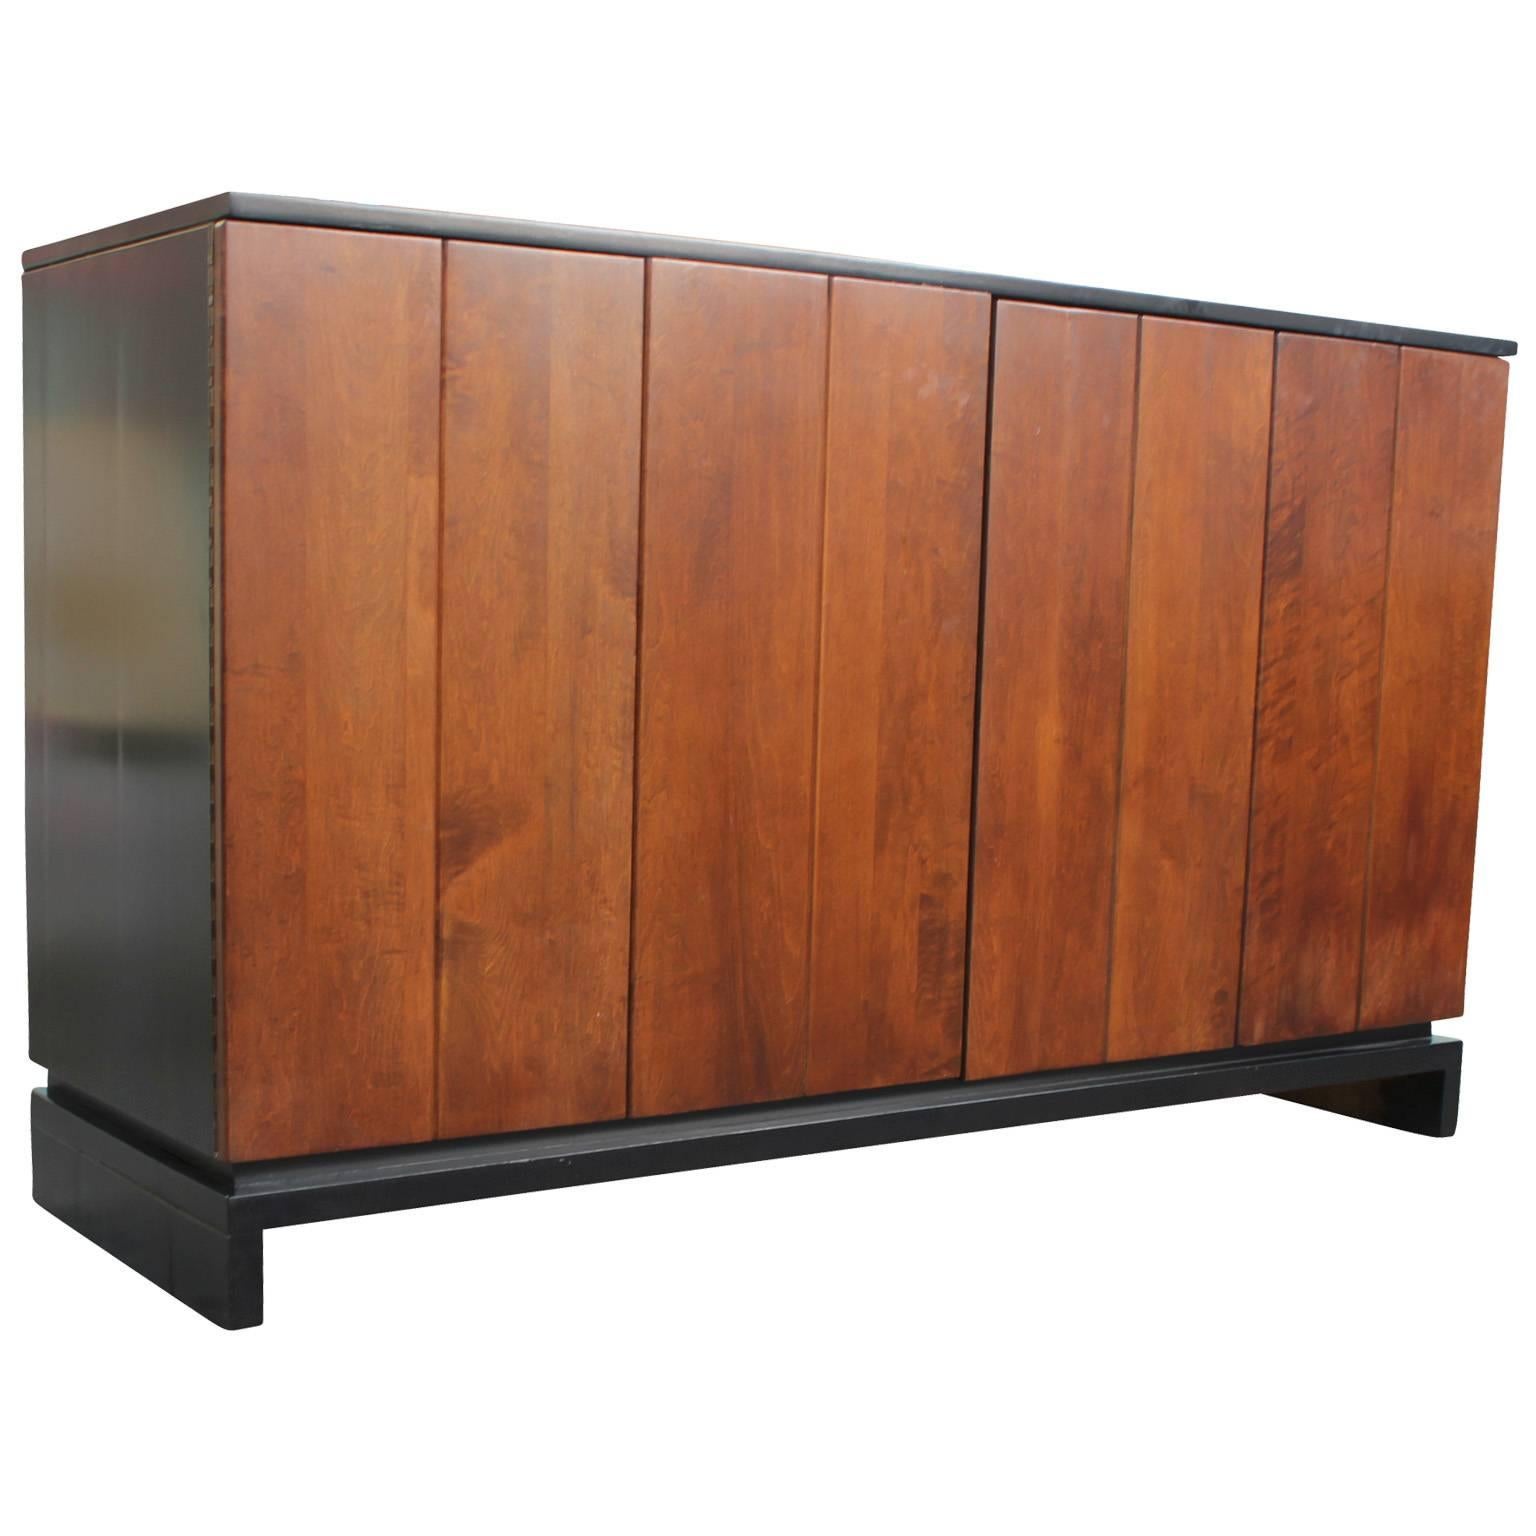 Stunning buffet/ sideboard/ cabinet designed by Hendrik Van Keppel and Taylor Green for Brown Saltman. Bi-fold doors reveal shelved storage and five drawers. Piece is freshly refinished-case in ebony and doors in a medium walnut. 